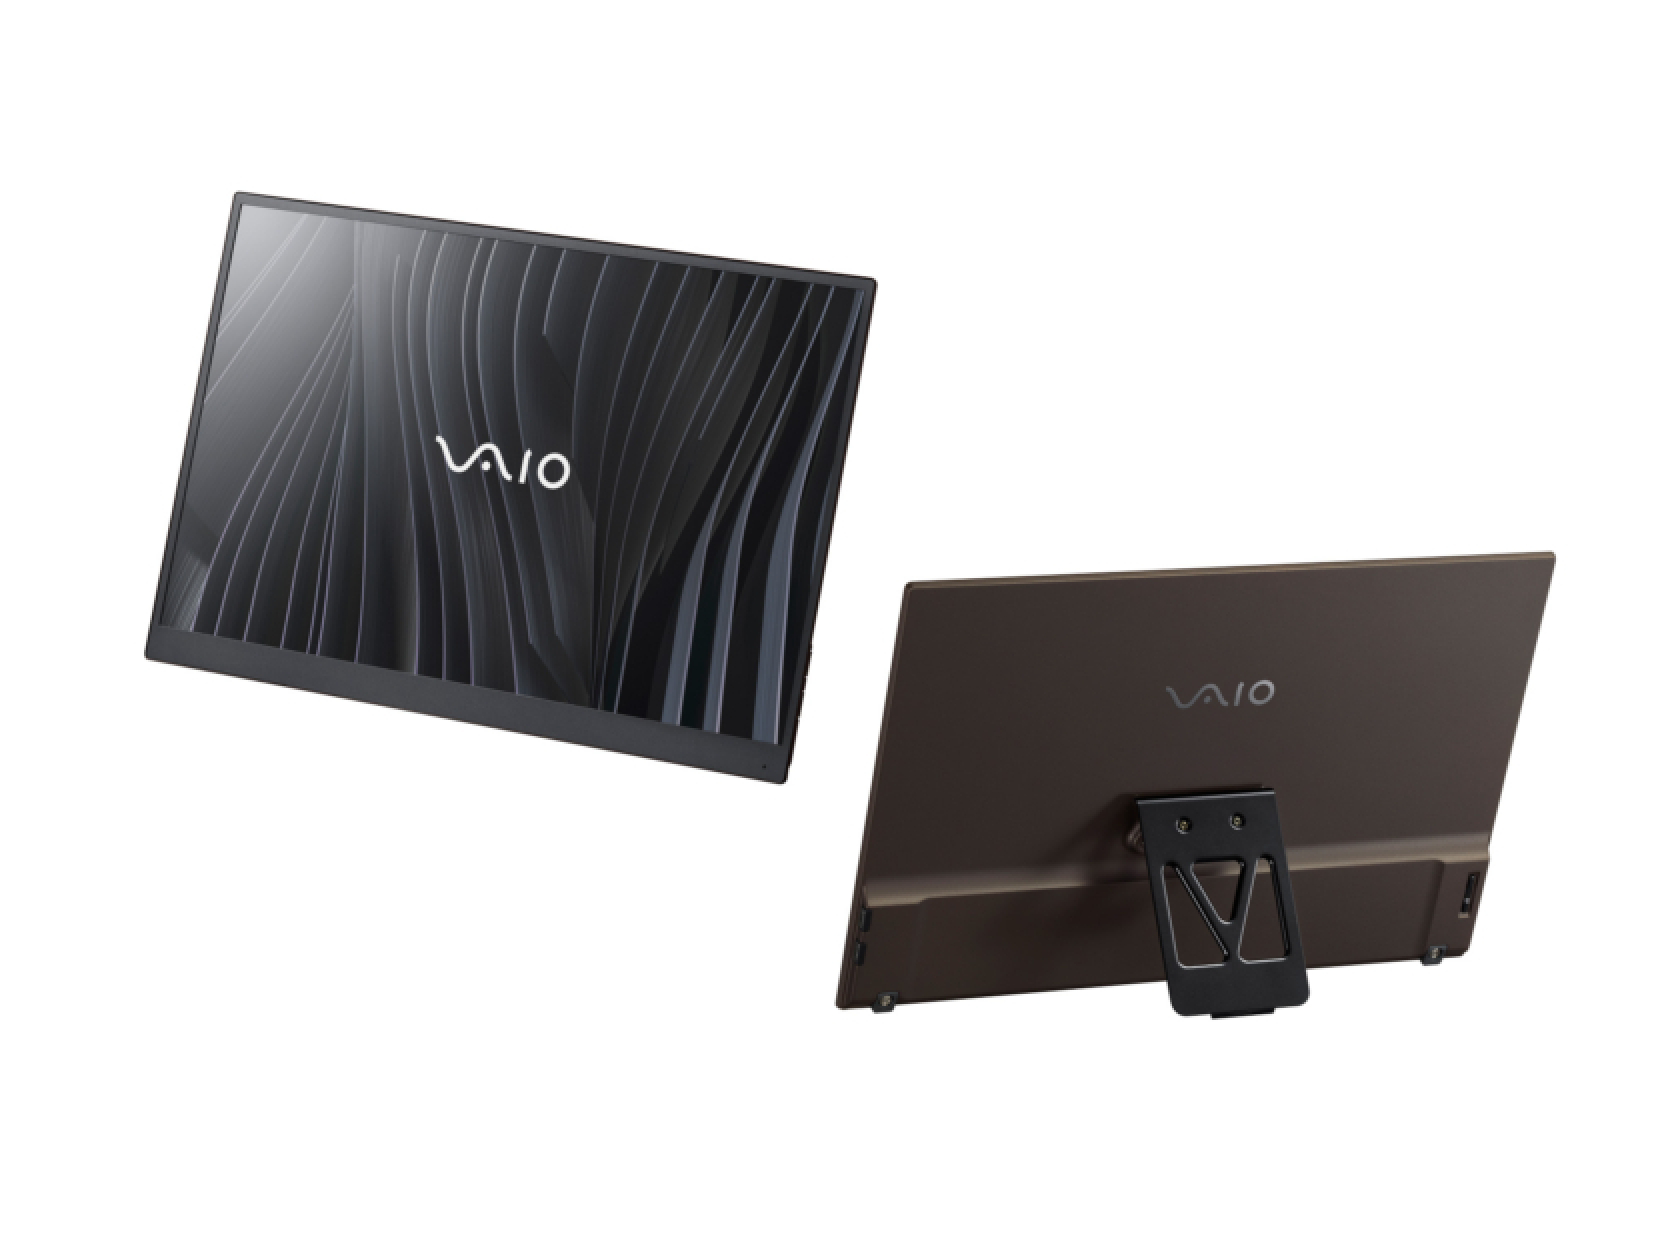 The Vaio Vision+ 14 is the world's lightest portable 14-inch monitor, priced at $340